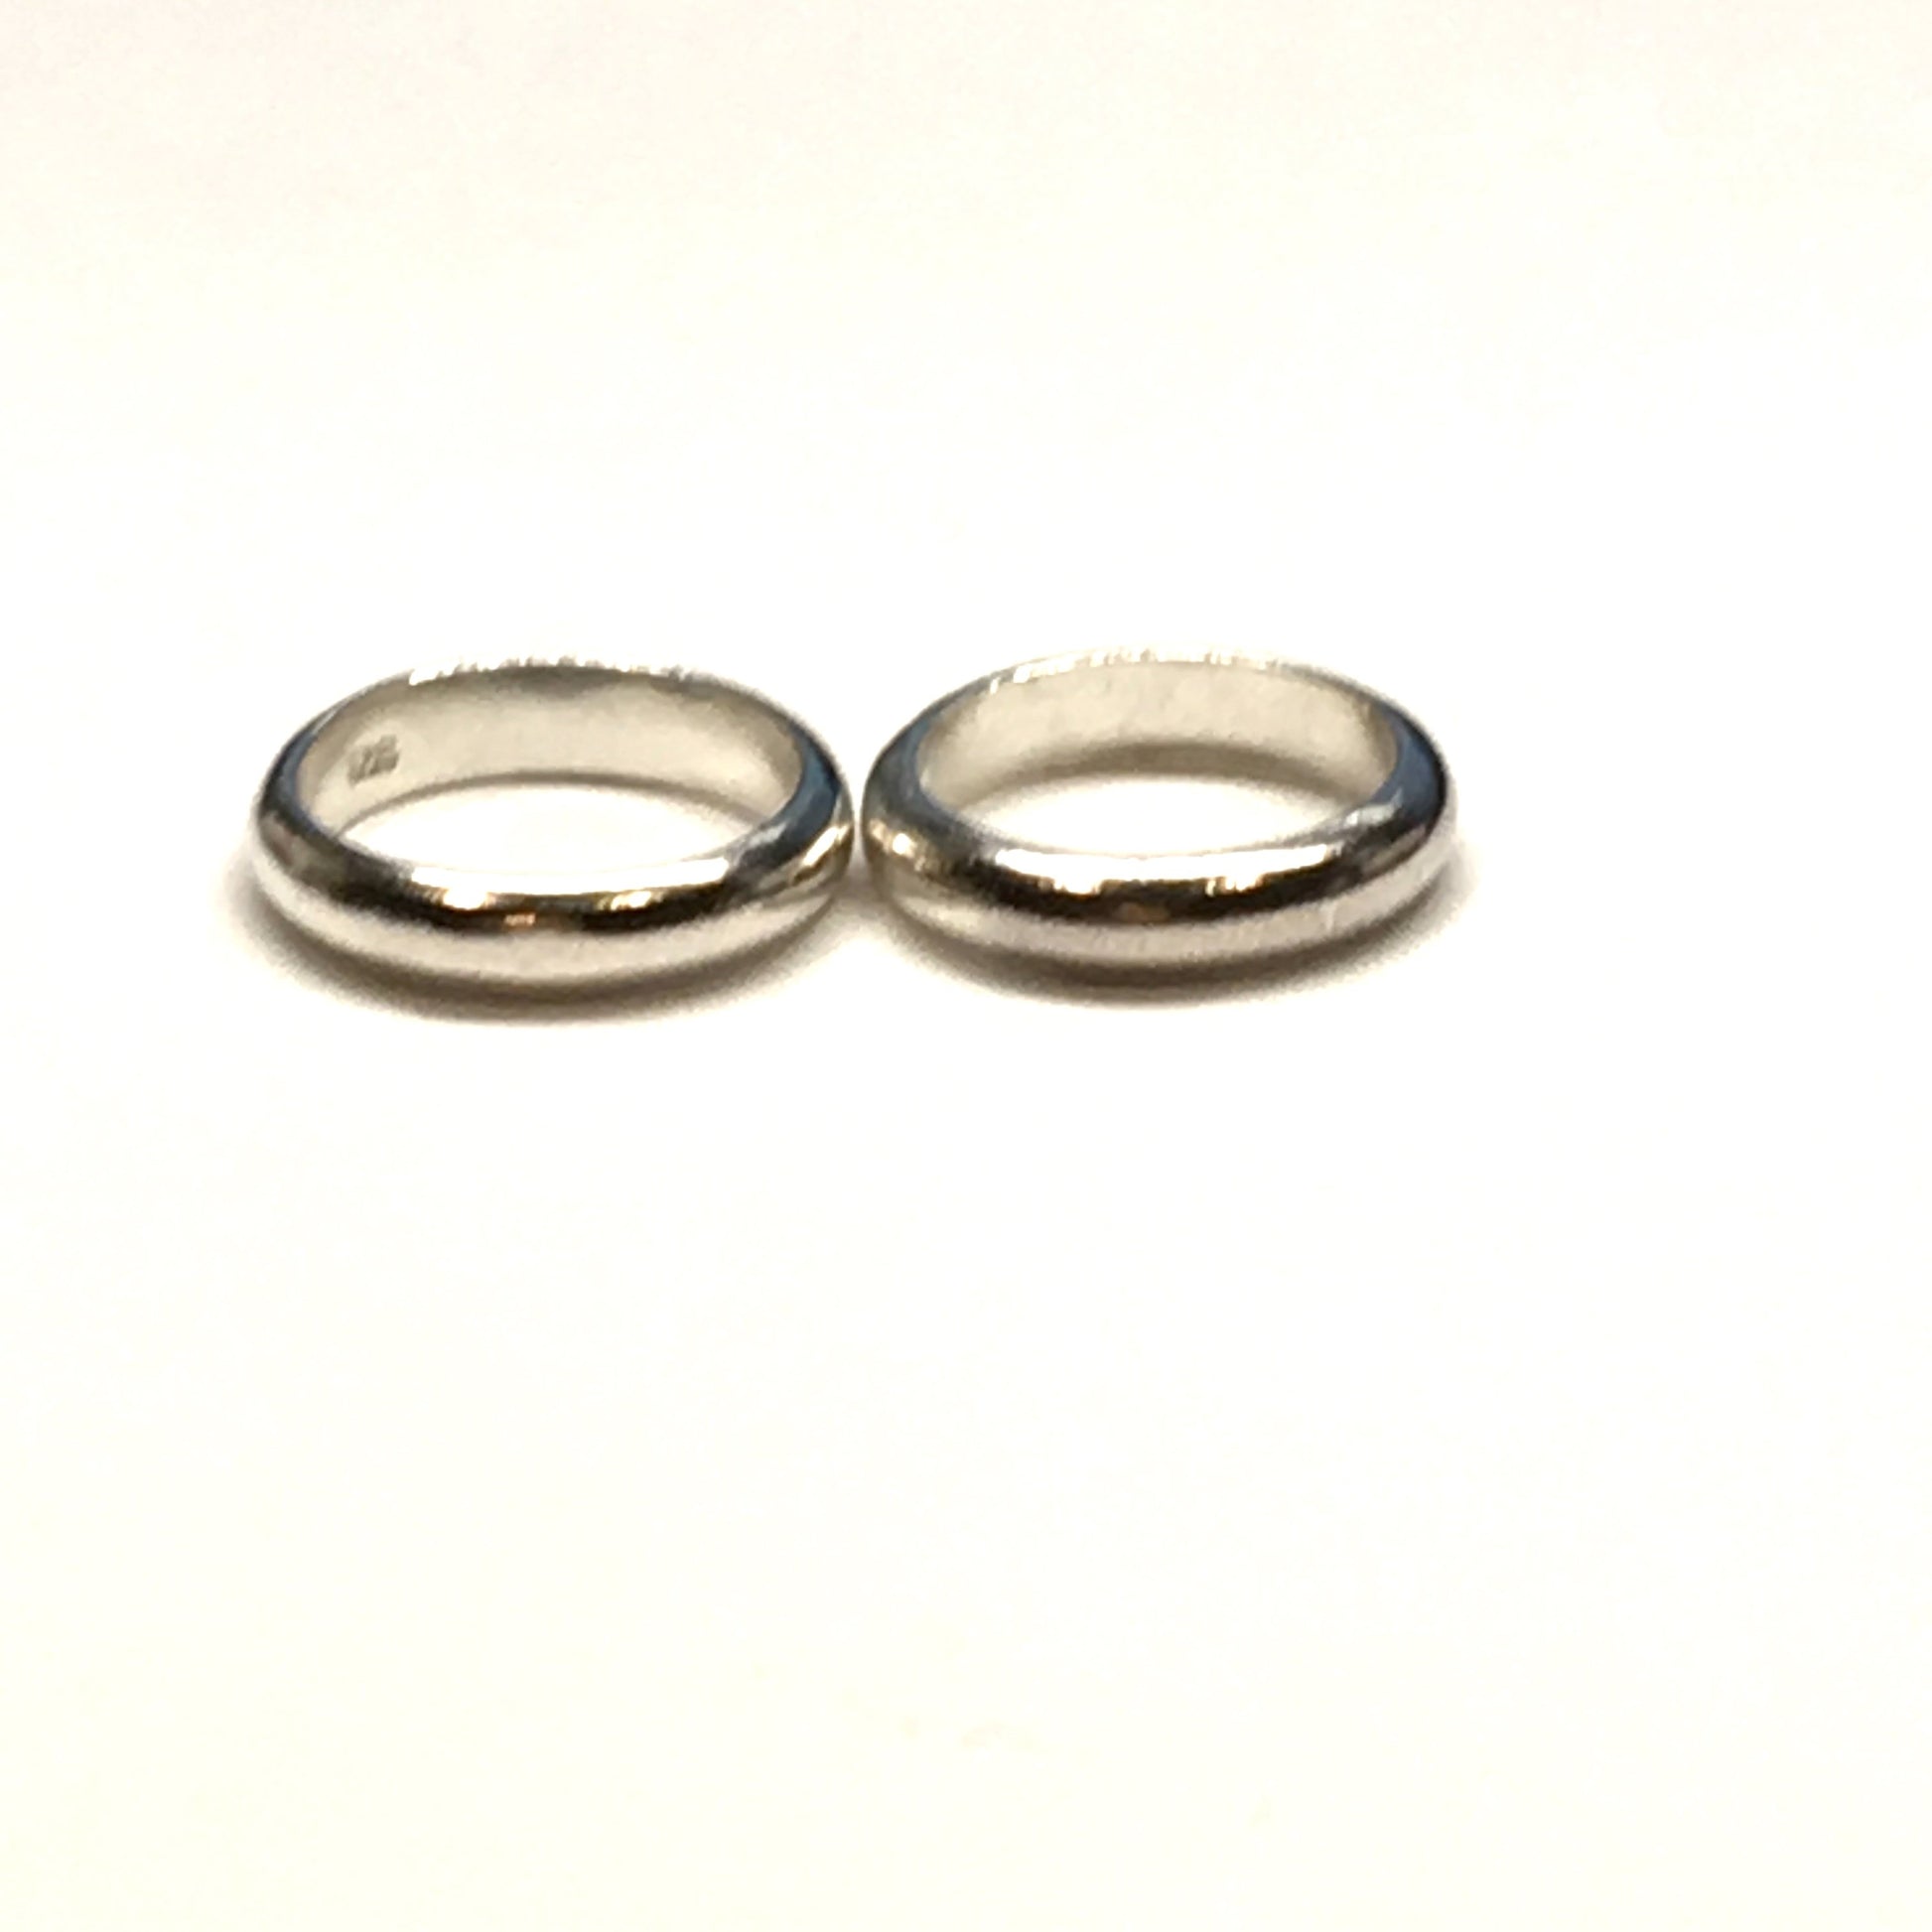 2 Ring Lot | Sterling Silver Plain Bands Midi Style, For kids, Or Use as Wedding Charms sz 0 11.5mm - Blingschlingers Jewelry